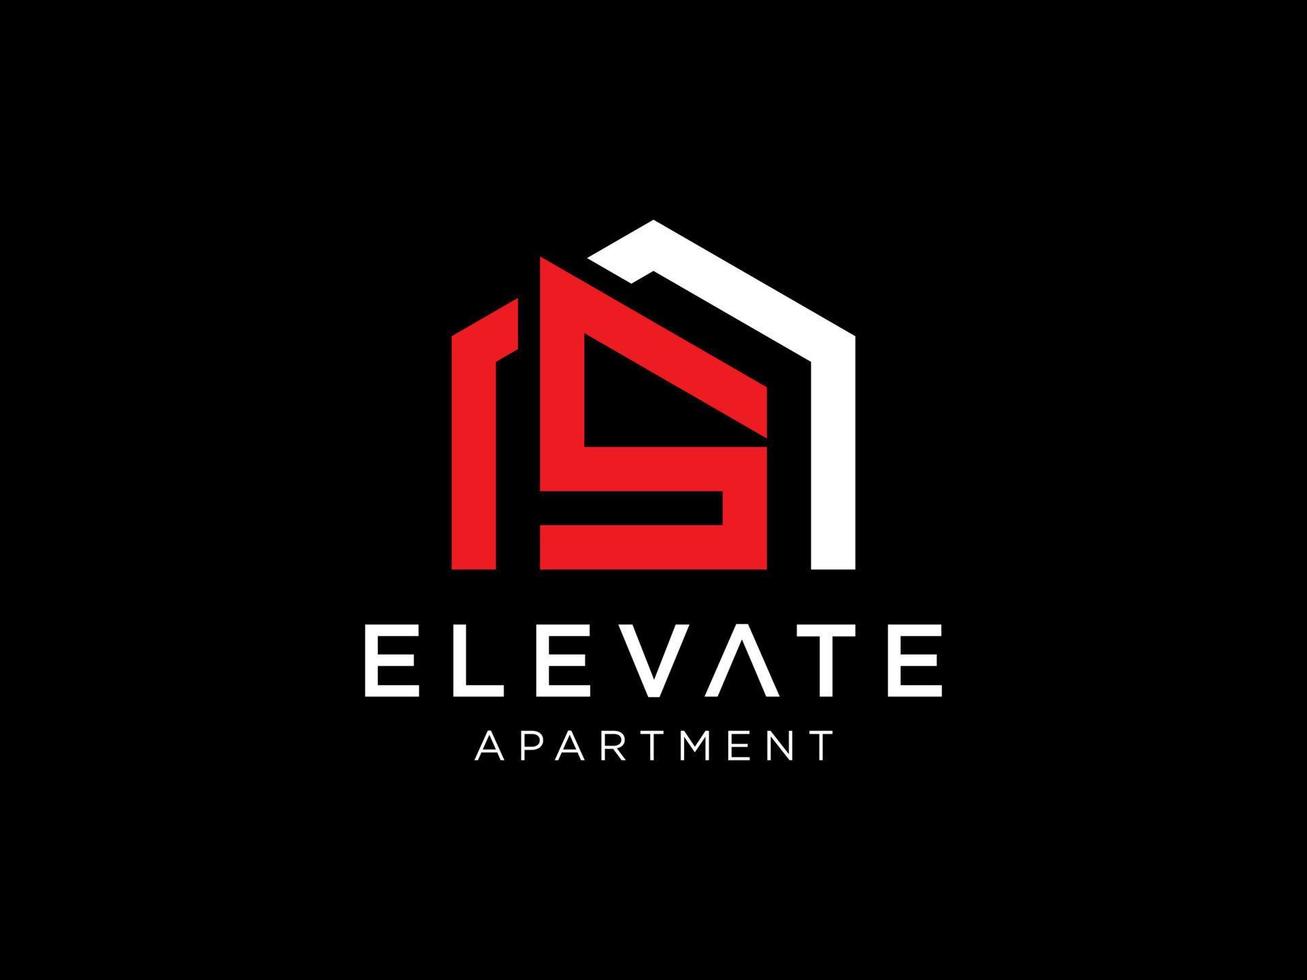 Logo design of S in vector for construction, home, real estate, building, property. Minimal awesome trendy professional logo design template on black background.